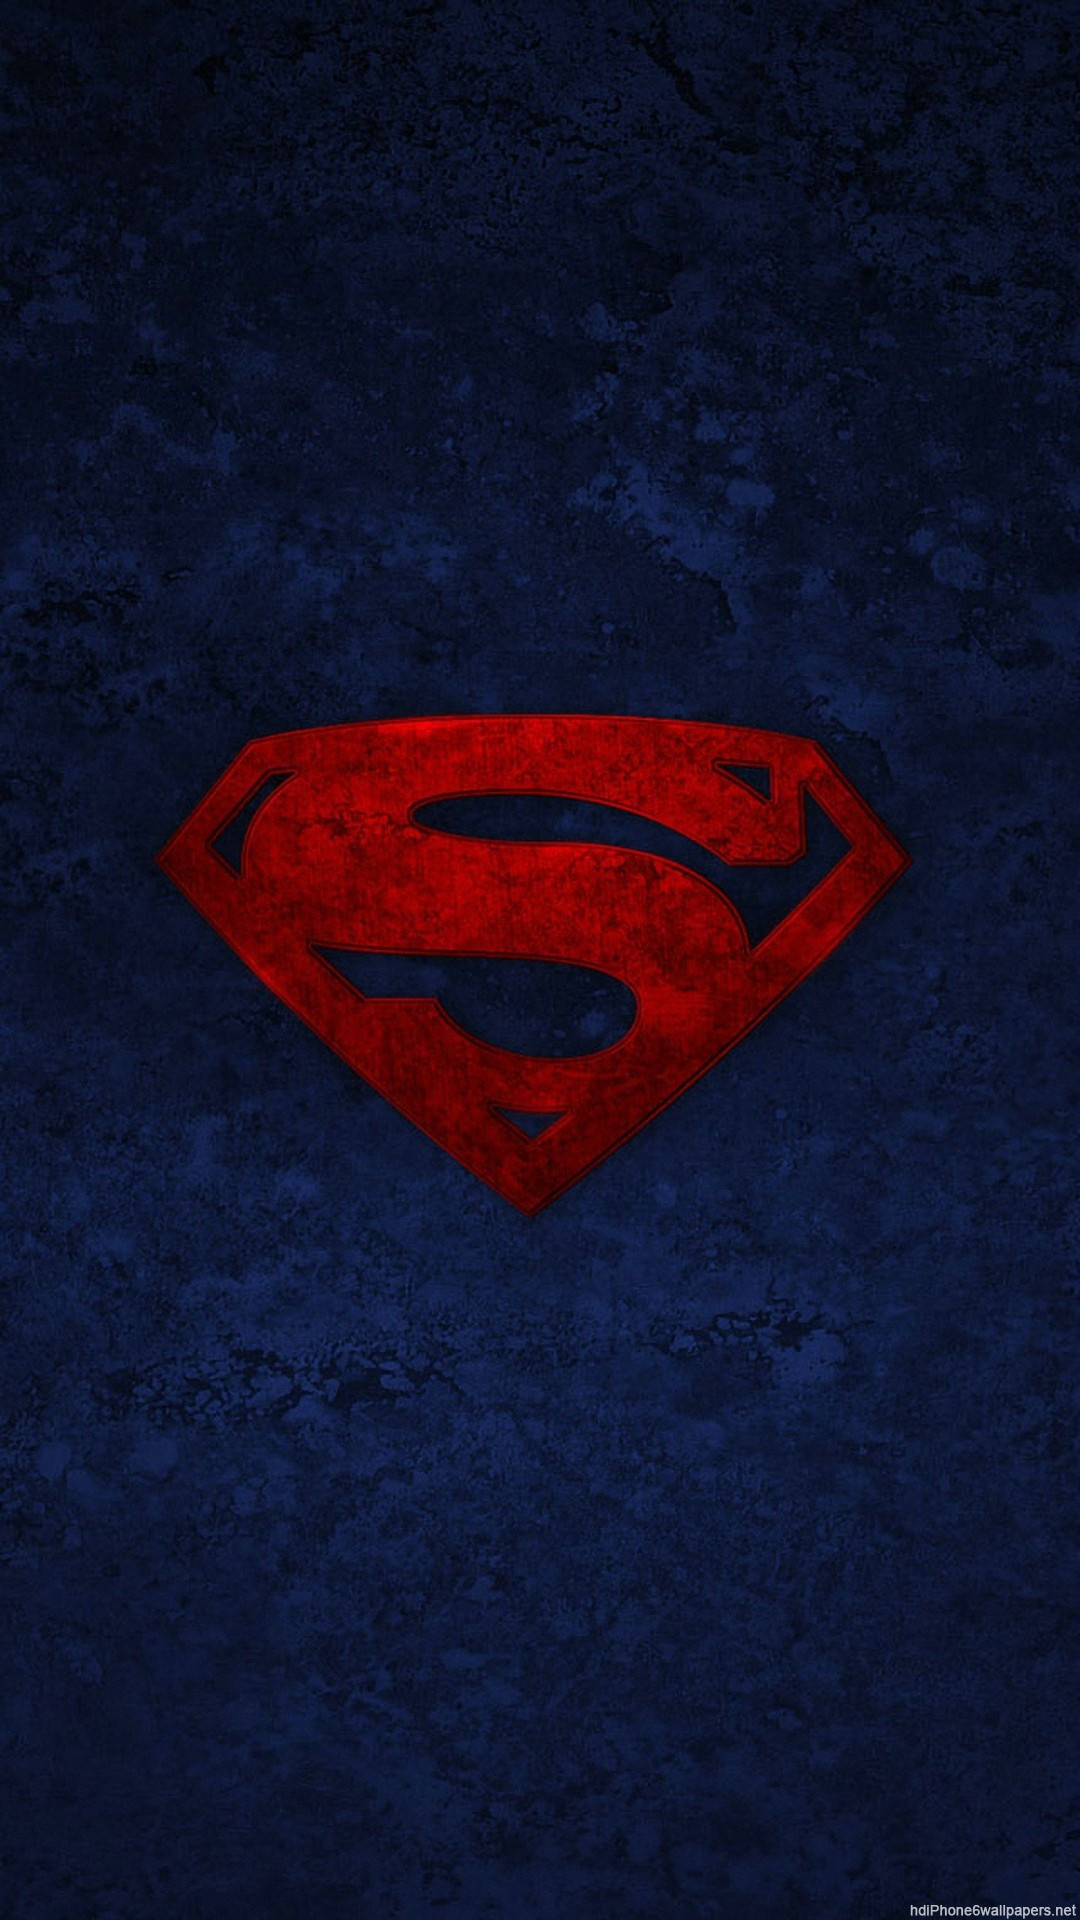 Superman Phone Wallpaper I did in PhotoShop  Superman hero Superman  Superman characters